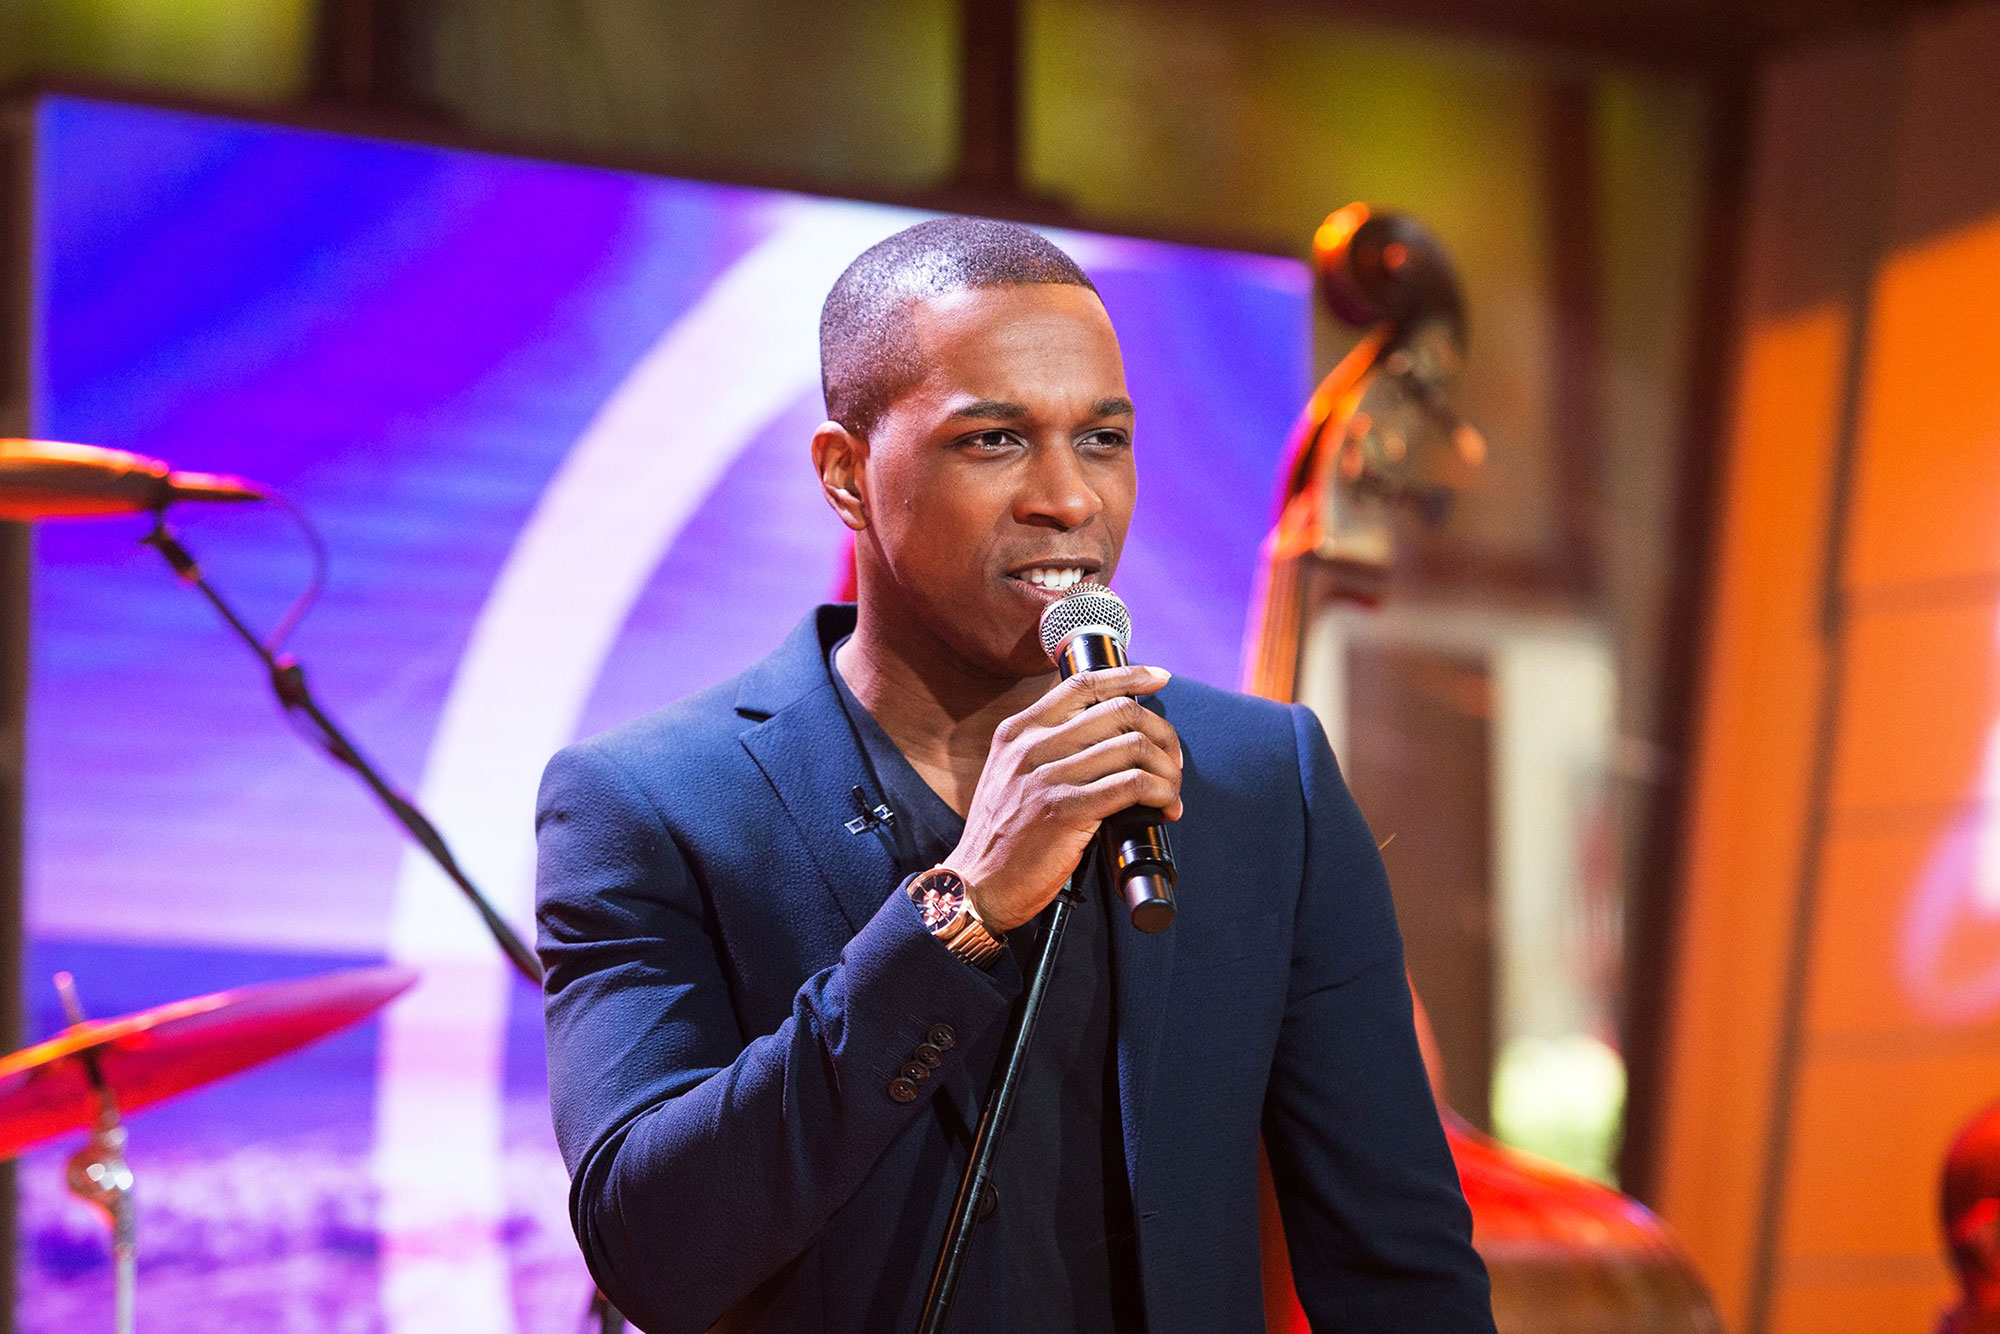 Leslie Odom Jr. and the Chicago Symphony Orchestra  at Ravinia Festival 